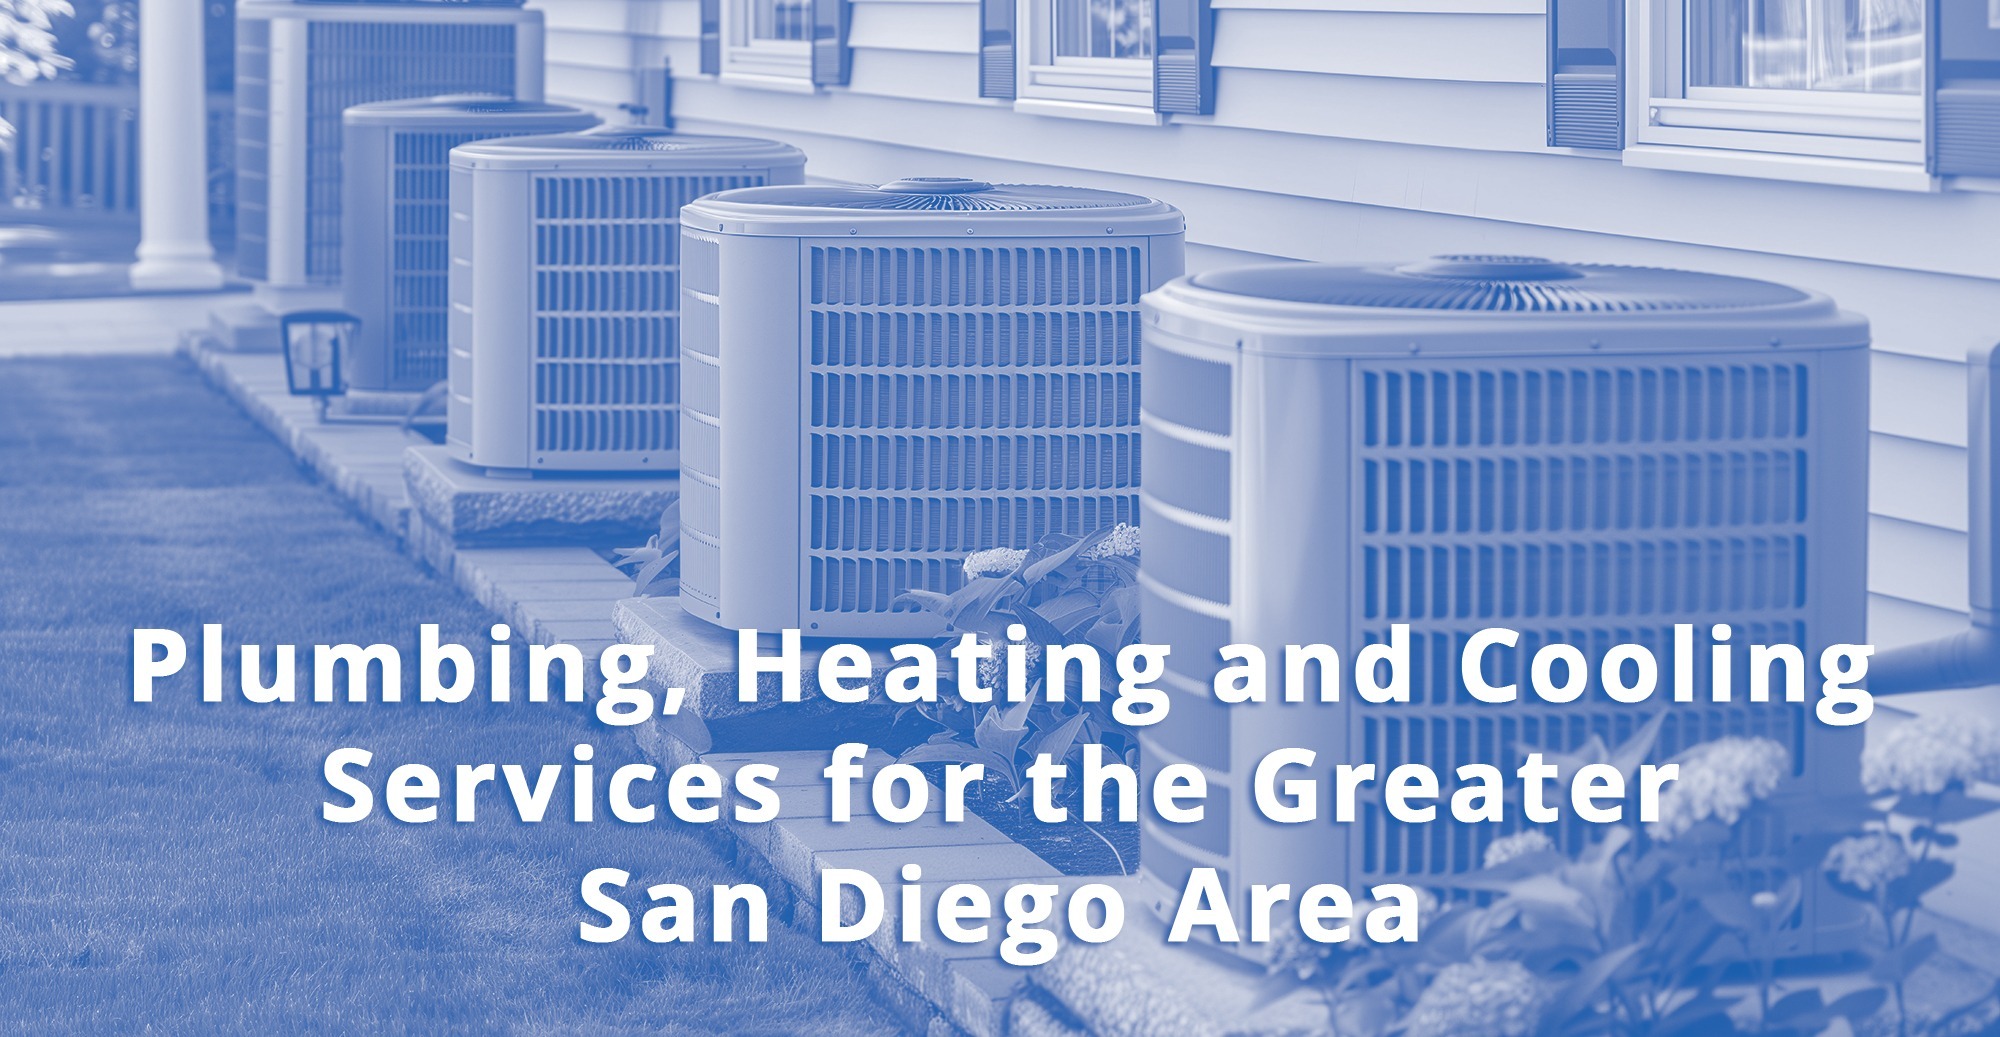 Plumbing, Heating and Cooling Services for the Greater San Diego Area